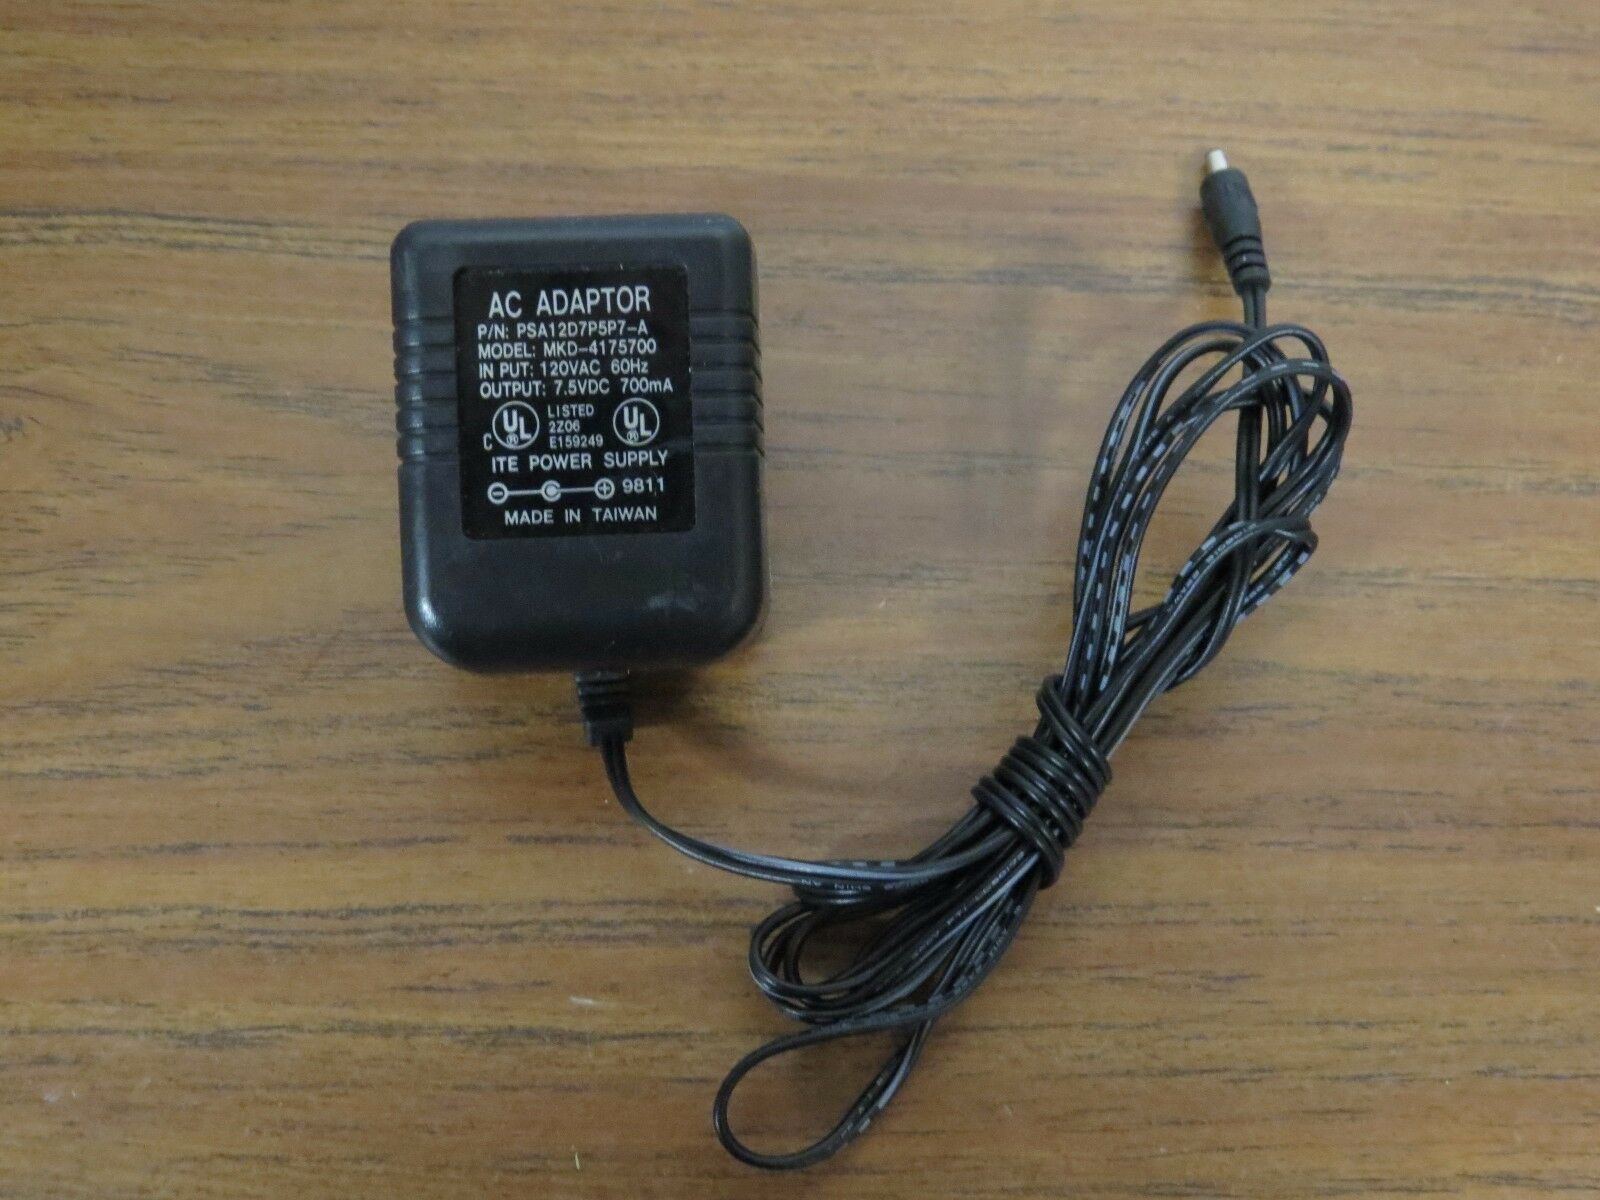 ITE 7.5V,700mA AC/DC POWER SUPPLY ADAPTER CORD MKD-4175700 Brand: Unbranded/Generic MPN: Does Not Apply UPC: Does